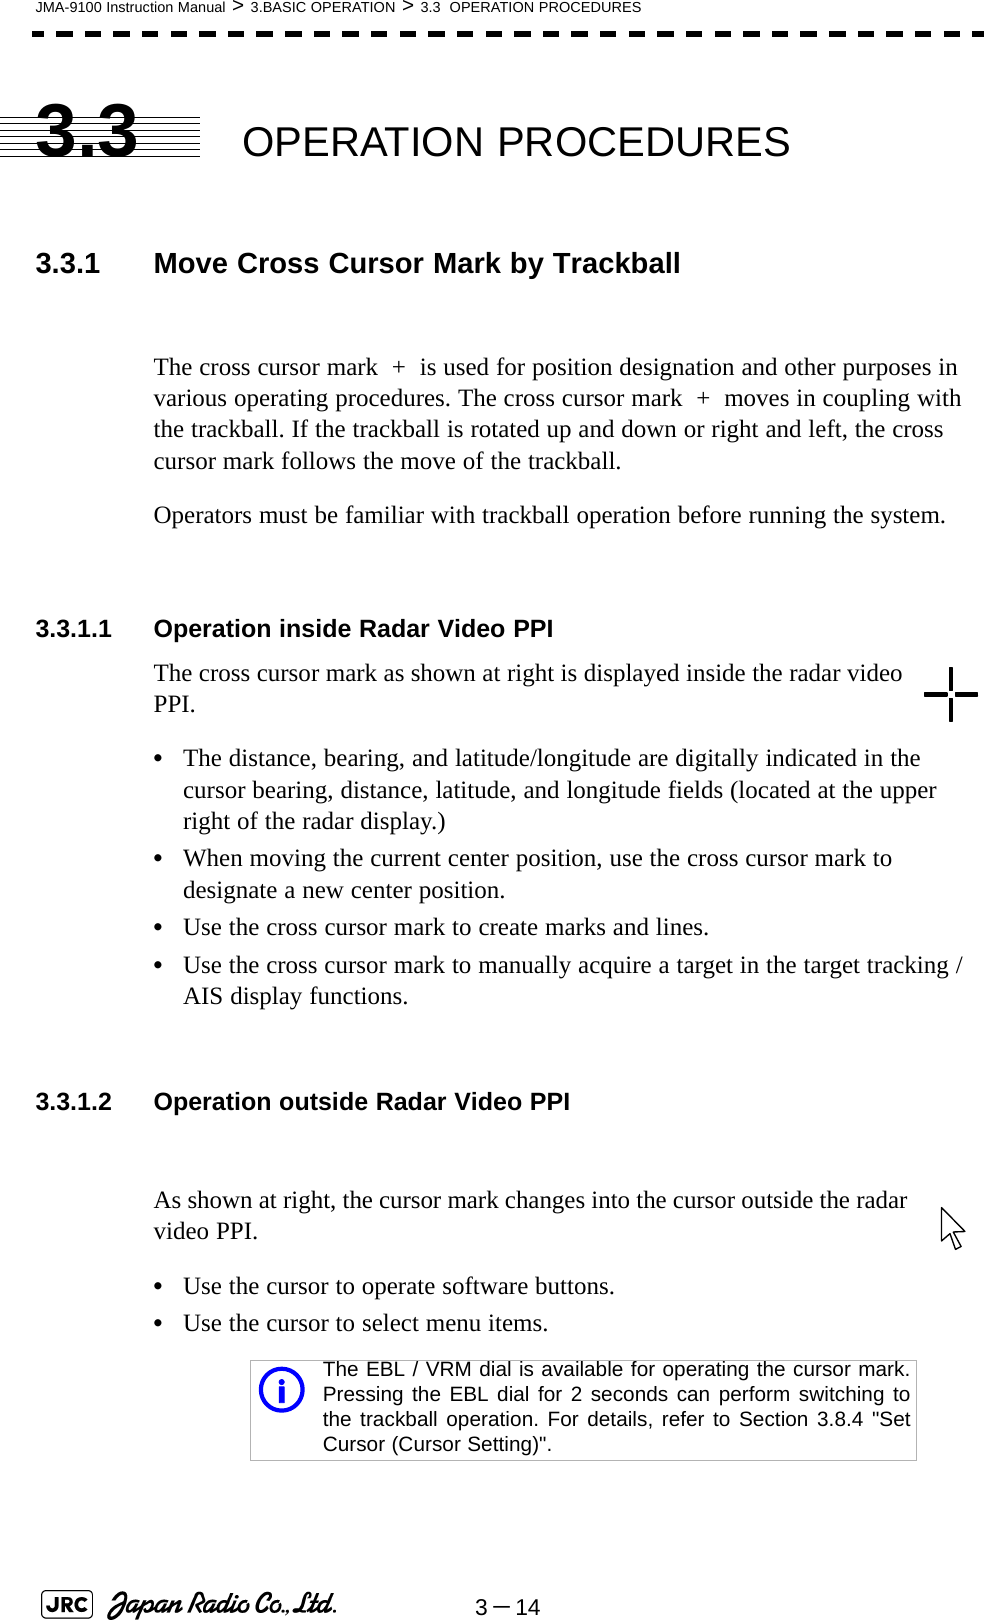 3－14JMA-9100 Instruction Manual &gt; 3.BASIC OPERATION &gt; 3.3  OPERATION PROCEDURES3.3 OPERATION PROCEDURES3.3.1 Move Cross Cursor Mark by TrackballThe cross cursor mark  +  is used for position designation and other purposes in various operating procedures. The cross cursor mark  +  moves in coupling with the trackball. If the trackball is rotated up and down or right and left, the cross cursor mark follows the move of the trackball.Operators must be familiar with trackball operation before running the system.3.3.1.1 Operation inside Radar Video PPIThe cross cursor mark as shown at right is displayed inside the radar video PPI.•The distance, bearing, and latitude/longitude are digitally indicated in the cursor bearing, distance, latitude, and longitude fields (located at the upper right of the radar display.)•When moving the current center position, use the cross cursor mark to designate a new center position.•Use the cross cursor mark to create marks and lines.•Use the cross cursor mark to manually acquire a target in the target tracking /AIS display functions.3.3.1.2 Operation outside Radar Video PPIAs shown at right, the cursor mark changes into the cursor outside the radar video PPI.•Use the cursor to operate software buttons.•Use the cursor to select menu items.iThe EBL / VRM dial is available for operating the cursor mark.Pressing the EBL dial for 2 seconds can perform switching tothe trackball operation. For details, refer to Section 3.8.4 &quot;SetCursor (Cursor Setting)&quot;.